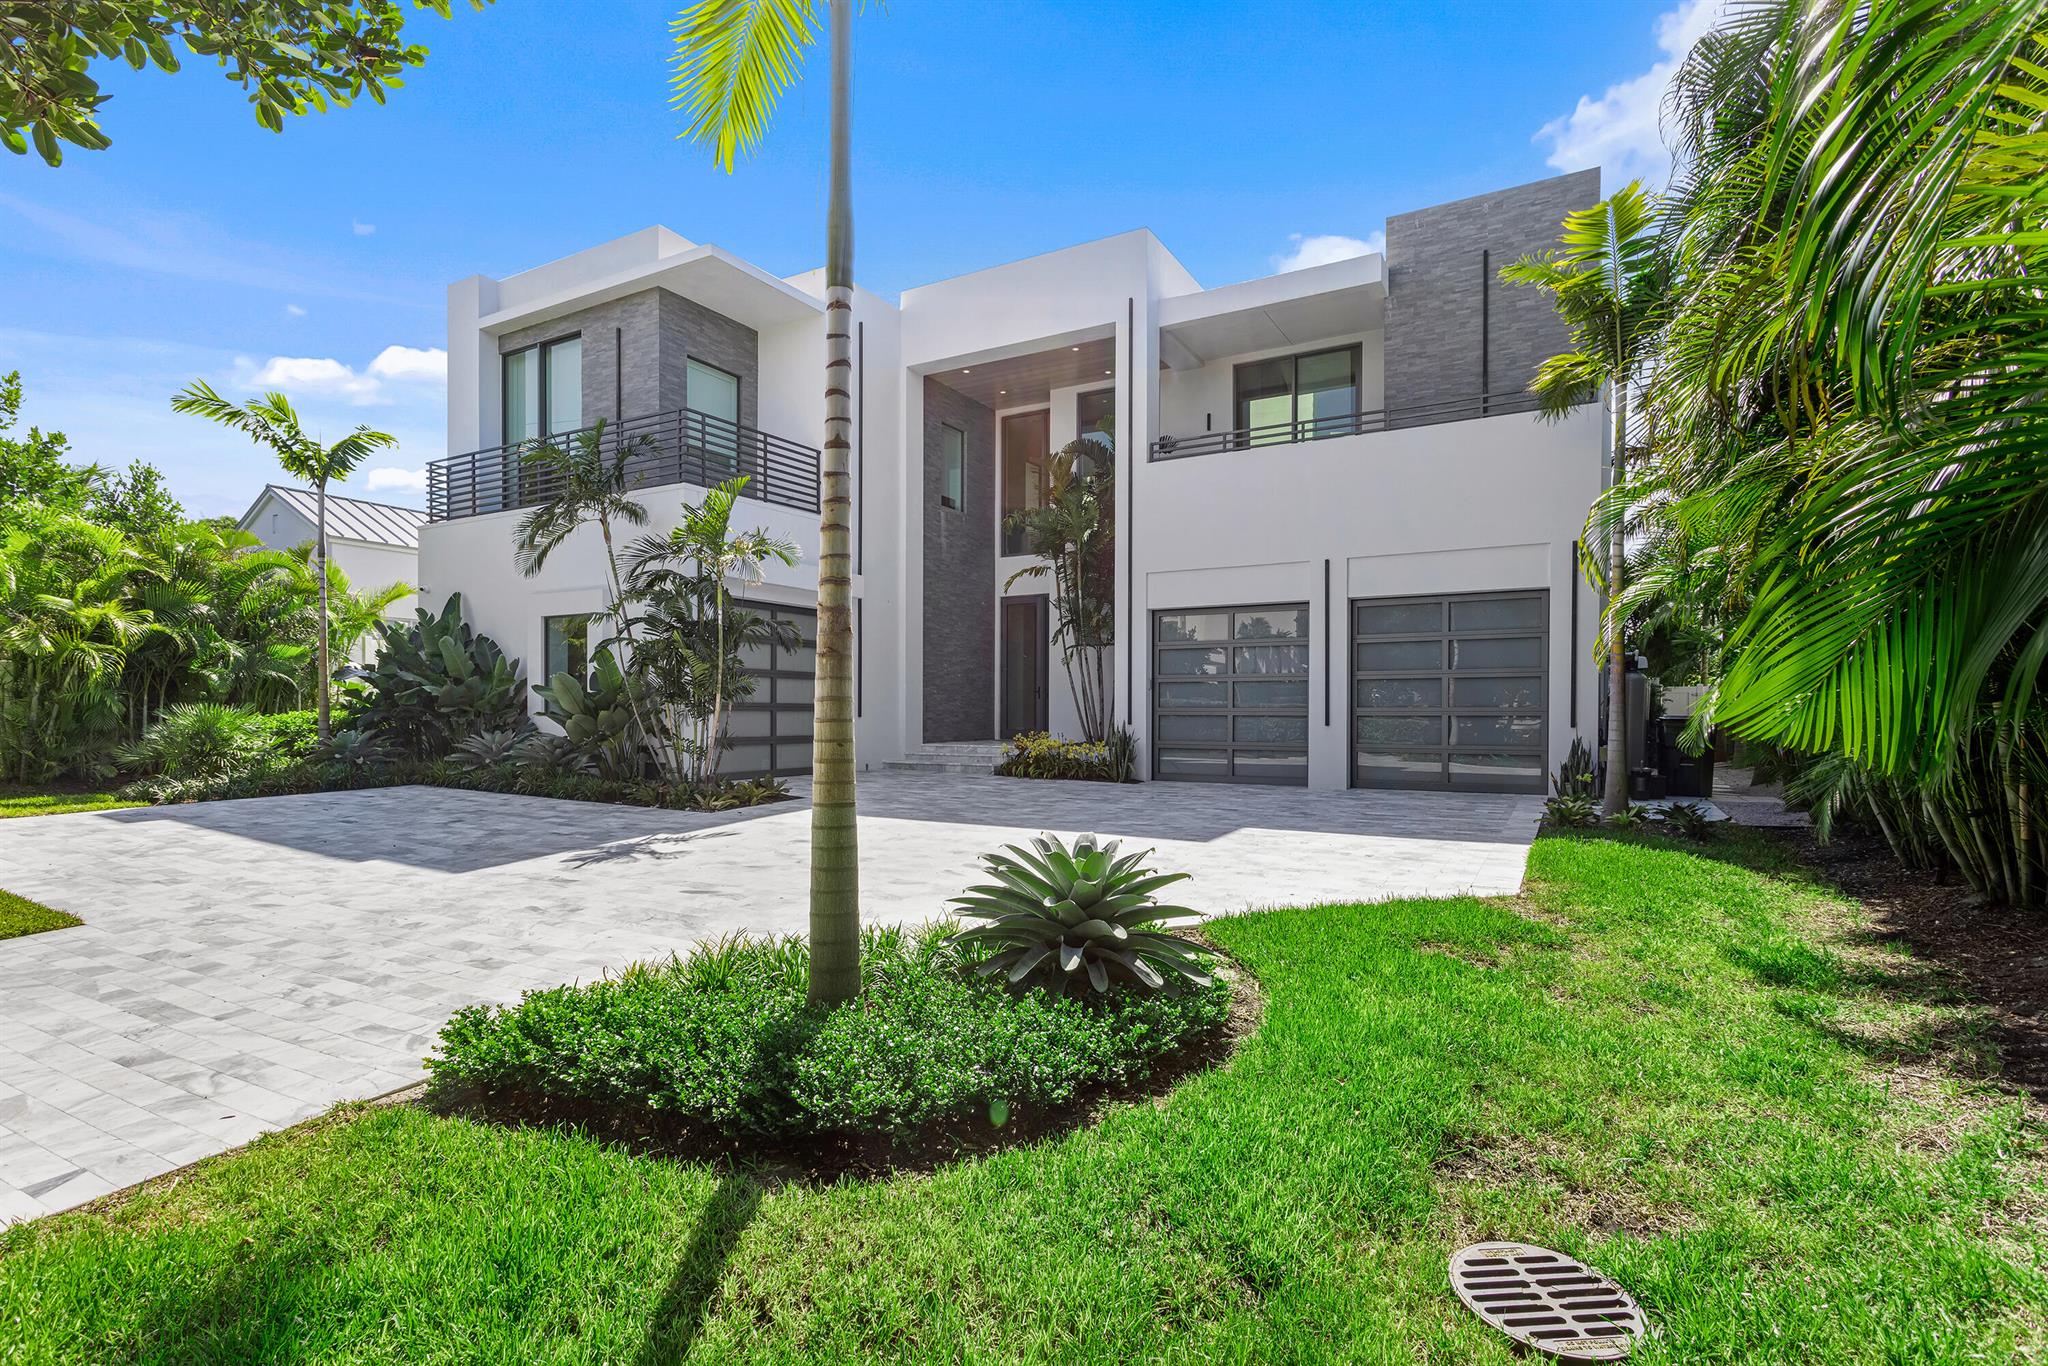 This brand-new five-bedroom Modern-style estate, built in 2022 by Signature Builders Group, is close to the beach and on the waterfront with a dock in Delray Beach's prestigious Estate Section. Three chic living areas, all opening to the pool- and water-view covered loggia, invite indoor/outdoor entertaining, and the primary suite and a guest suite open to private water-view balconies. LOCATION: 

1260 South Ocean Boulevard, Delray Beach, Florida: The sought-after Estate Section in Delray Beach is just steps from the City's pristine award-winning beaches. This premier neighborhood is also just a short drive to Downtown Delray Beach's vibrant Atlantic Avenue, with its array of arts and entertainment offerings interspersed with fine-dining establishments, caf+¬s and bars.

PROPERTY: 

The tropically landscaped gated front yard, with a gray brick drive, presents beautifully, while the back yard features a wonderful entertainment area. The large covered loggia, with automatic screens, features a summer kitchen overlooking the salt-water heated pool and spill-over spa, and a grilling station is on a side loggia. At the end of the canal with 40-feet of waterfrontage, the composite dock can accommodate a boat up to 30 feet. With two garages, one accommodates two cars, and the other garage currently serves as an air-conditioned gym. 

RESIDENCE:  

Built in 2022 by Signature Builders Group, this five-bedroom, 8,580 +/- total-square-foot Modern-style masterpiece features a dramatic open design with walls of floor-to-ceiling impact-glass that bathe the interiors in soft natural light and offer serene water views. Chic details include cerused wide-plank wood floors, custom cabinetry, designer light fixtures, and attractive three-dimensional feature walls. The foyer and stair hall flow out to the great room, with living and dining areas fronted by a bank of sliding doors that open to the pool loggia offering water views. Flanking the great room is the club room, featuring pocket sliding doors accessing the pool loggia, a fully equipped underlit marble-topped wet bar, and a handsome feature wall behind the television. On the other side of the great room is the family room, with an entire corner of glass sliding doors that open to the pool loggia inviting indoor/outdoor entertaining. Just adjacent, the gourmet kitchen is finished with custom cabinetry, marble counters, pantry, professional-grade appliances, and a center cook island with an attached table. On the second floor, a loft living area serves the primary suite, his and her offices, and three guest bedrooms. The water-view primary suite comprises a spacious bedroom opening to a large private balcony, custom-fitted walk-in closets, and a spa-inspired tiled bathroom with an underlit double-sink vanity, walk-through shower, freestanding tub, and separate water closet. His office, with  custom cabinetry, features floor-to-ceiling windows that also offer incredible water views. The guest bedrooms have ensuite bathrooms and private balconies. Completing the layout are an elevator, first-floor guest bedroom suite, second floor laundry room, and a powder room. Amenities include automatic blinds, natural gas accommodation, full-house generator, four American Standard air conditioners, a tankless hot-water heater, LED lighting, and full-house water purifying system.

The information herein is deemed reliable and subject to errors, omissions or changes without notice.  The information has been derived from architectural plans or county records. Buyer should verify all measurements. 

DISCLAIMER: Information published or otherwise provided by the listing company and its representatives including but not limited to prices, measurements, square footages, lot sizes, calculations, statistics, and videos are deemed reliable but are not guaranteed and are subject to errors, omissions or changes without notice. All such information should be independently verified by any prospective purchaser or seller. Parties should perform their own due diligence to verify such information prior to a sale or listing. Listing company expressly disclaims any warranty or representation regarding such information. Prices published are either list price, sold price, and/or last asking price. The listing company participates in the Multiple Listing Service and IDX. The properties published as listed and sold are not necessarily exclusive to listing company and may be listed or have sold with other members of the Multiple Listing Service. Transactions where listing company represented both buyers and sellers are calculated as two sales. The listing company's marketplace is all of the following: Vero Beach, Town of Orchid, Indian River Shores, Town of Palm Beach, West Palm Beach, Manalapan Beach, Point Manalapan, Hypoluxo Island, Ocean Ridge, Gulf Stream, Delray Beach, Highland Beach, Boca Raton, East Deerfield Beach, Hillsboro Beach, Hillsboro Shores, East Pompano Beach, Lighthouse Point, Sea Ranch Lakes and Fort Lauderdale. Cooperating brokers are advised that in the event of a Buyer default, no financial fee will be paid to a cooperating Broker on the Deposits retained by the Seller. No financial fees will be paid to any cooperating broker until title passes or upon actual commencement of a lease. Some affiliations may not be applicable to certain geographic areas. If your property is currently listed with another broker, please disregard any solicitation for services. Copyright 2022 by the listing company. All Rights Reserved.